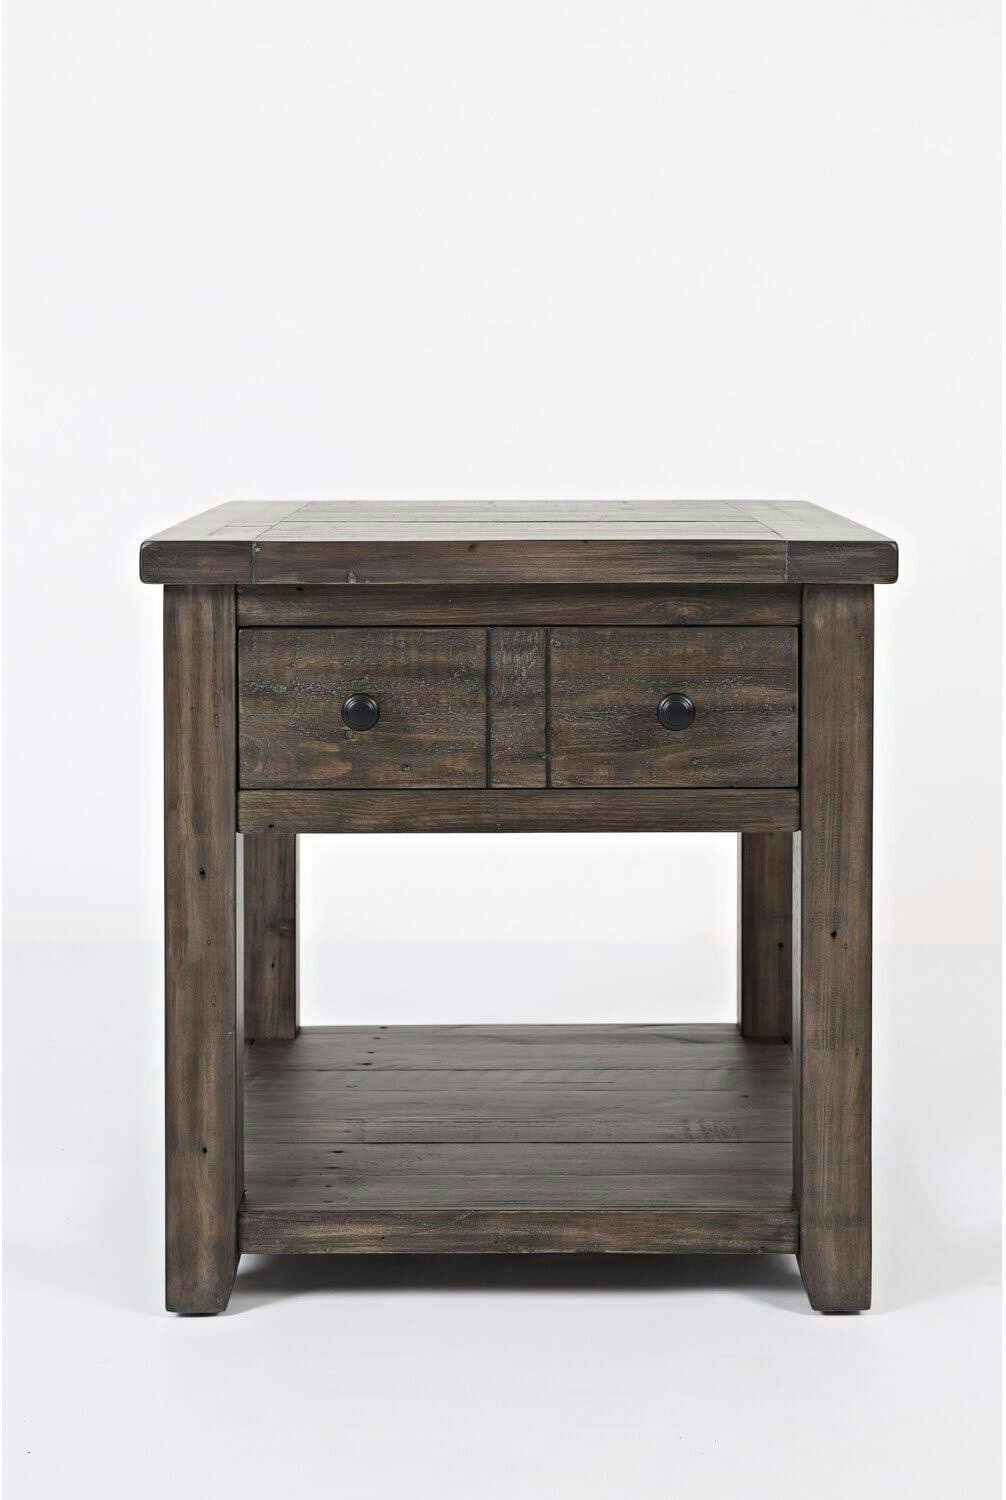 Rustic Reclaimed Pine Square End Table with Storage, Barnwood Brown